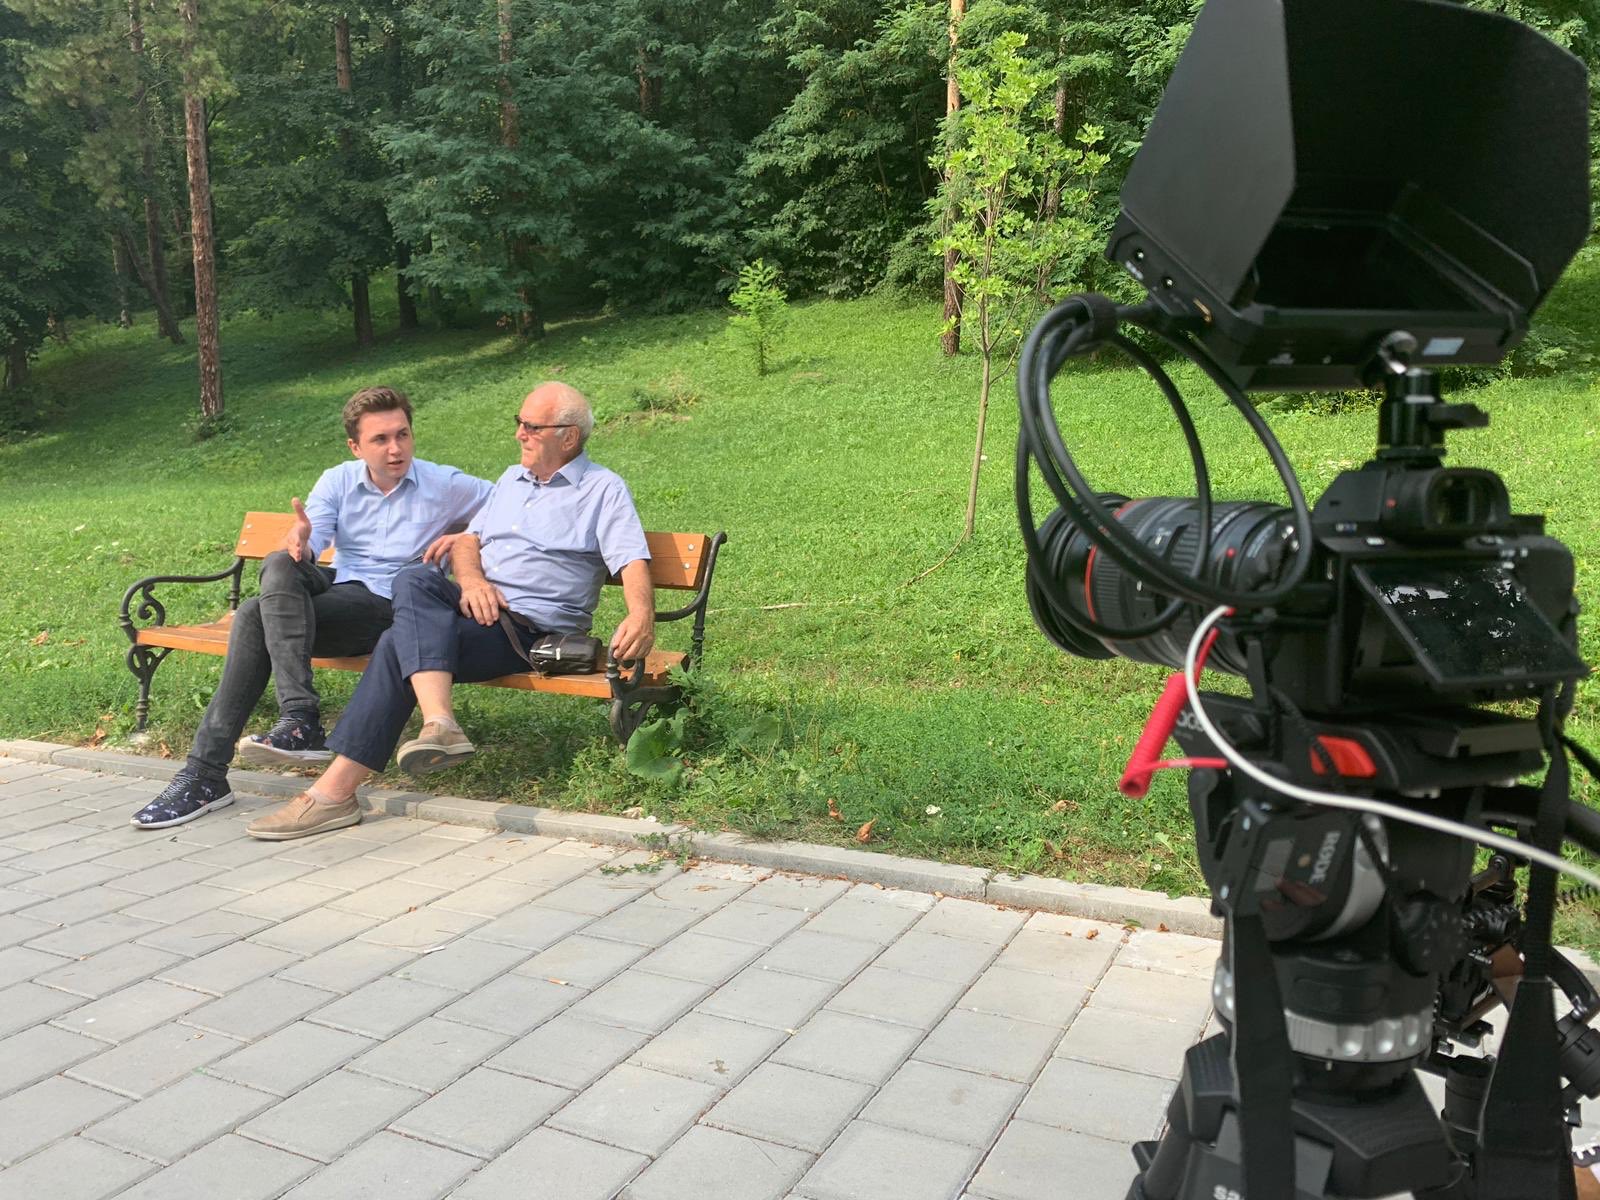 Two men sit on a bench with a camera pointed at them to talk about independent media efforts